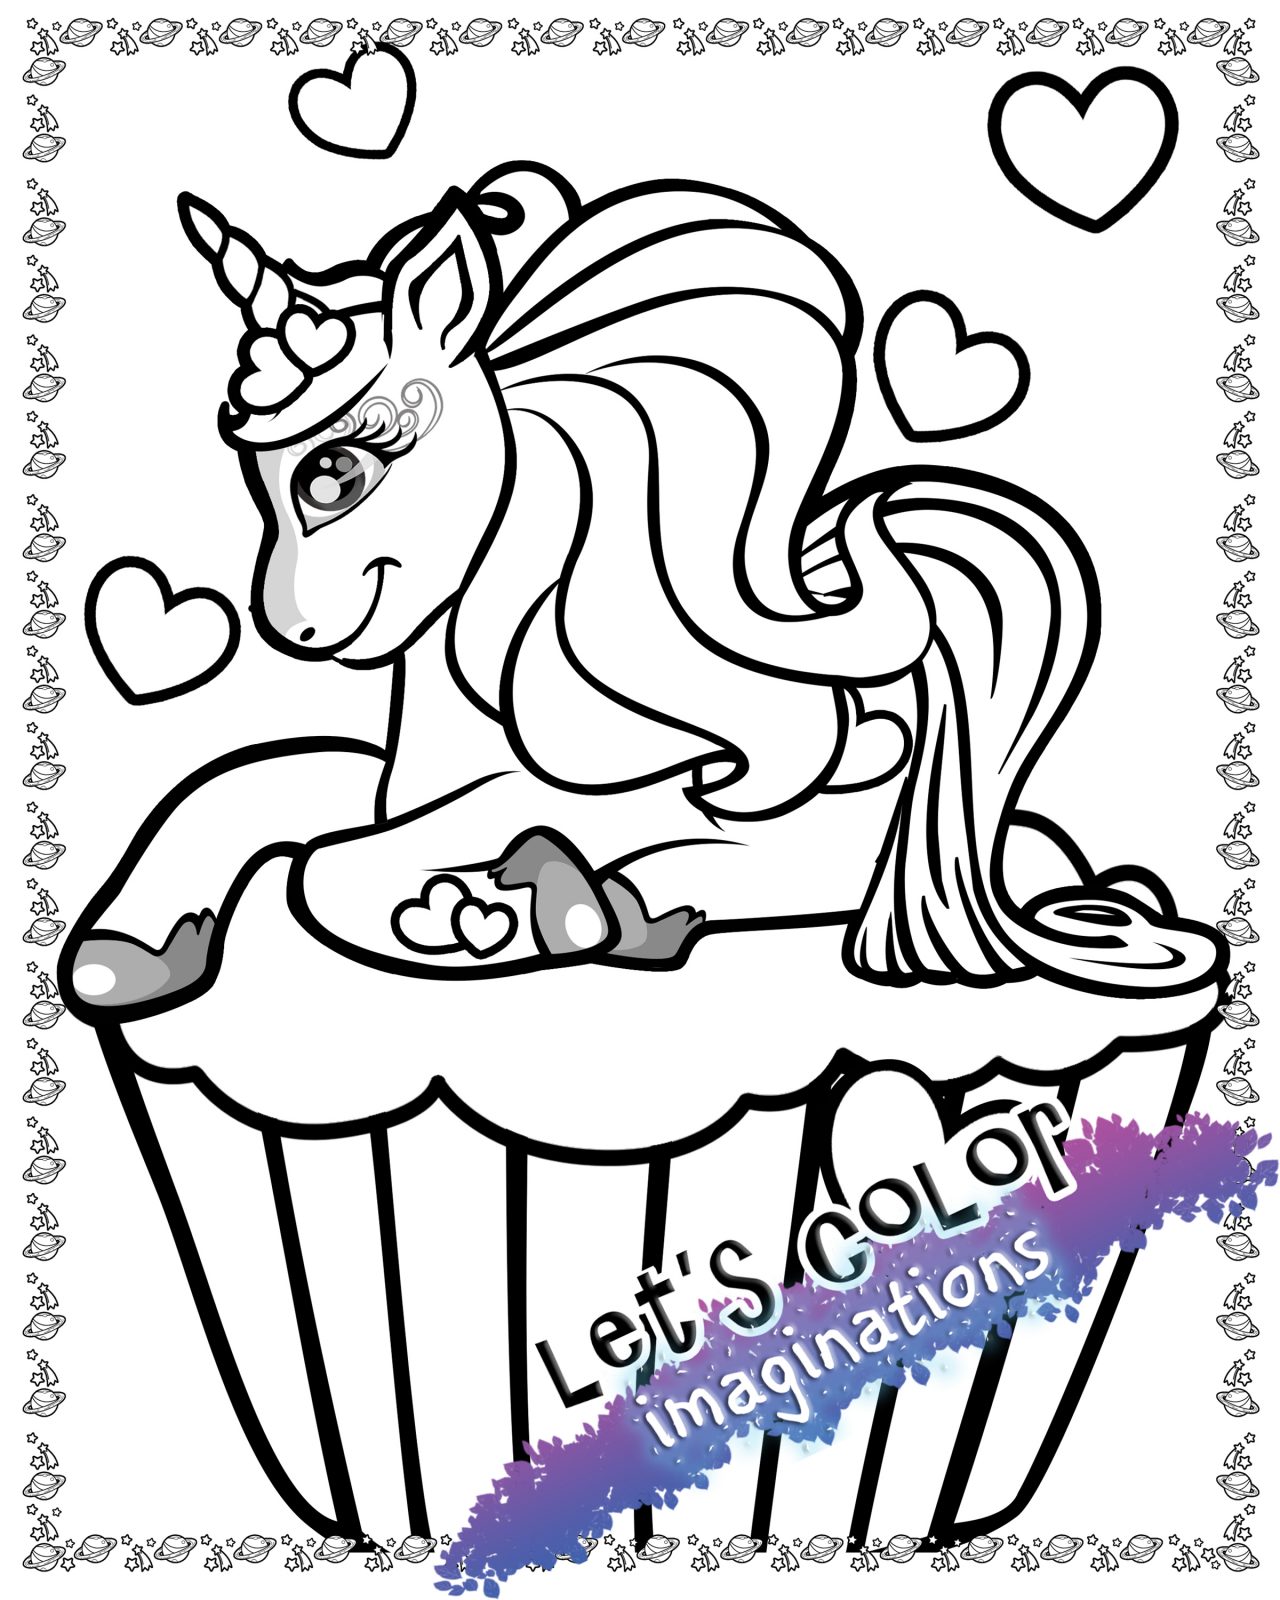 Unicorn Coloring Book for Kids 4-8 | Let's Color Imaginations